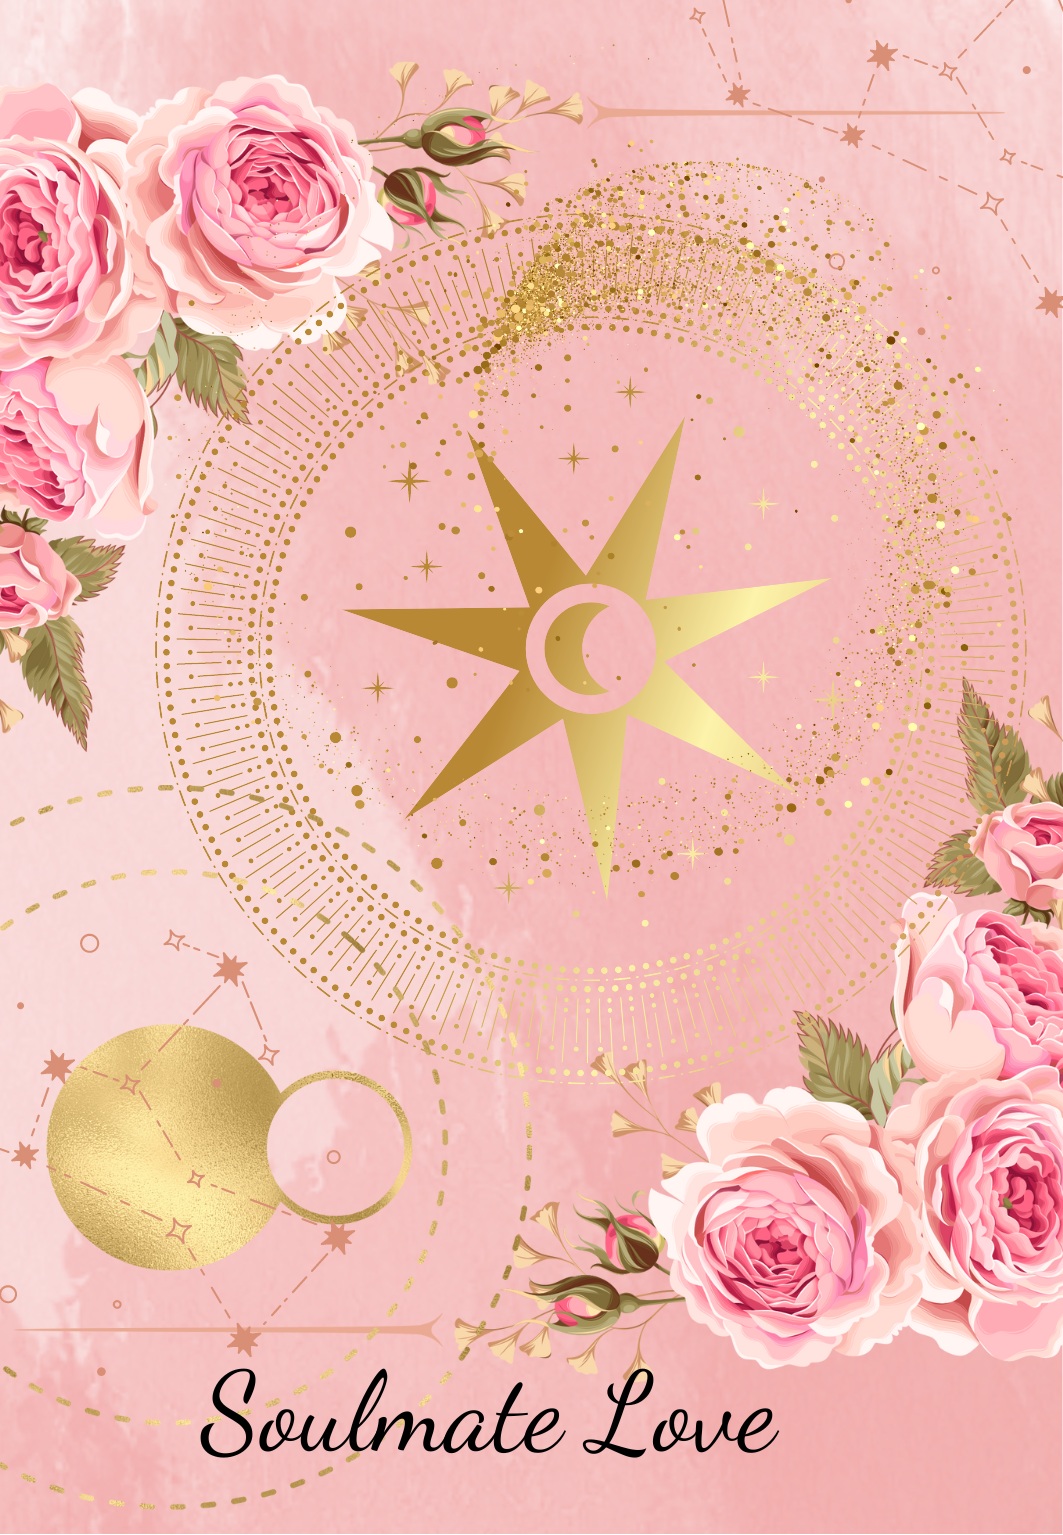 rose border and gold star elements on pink background 